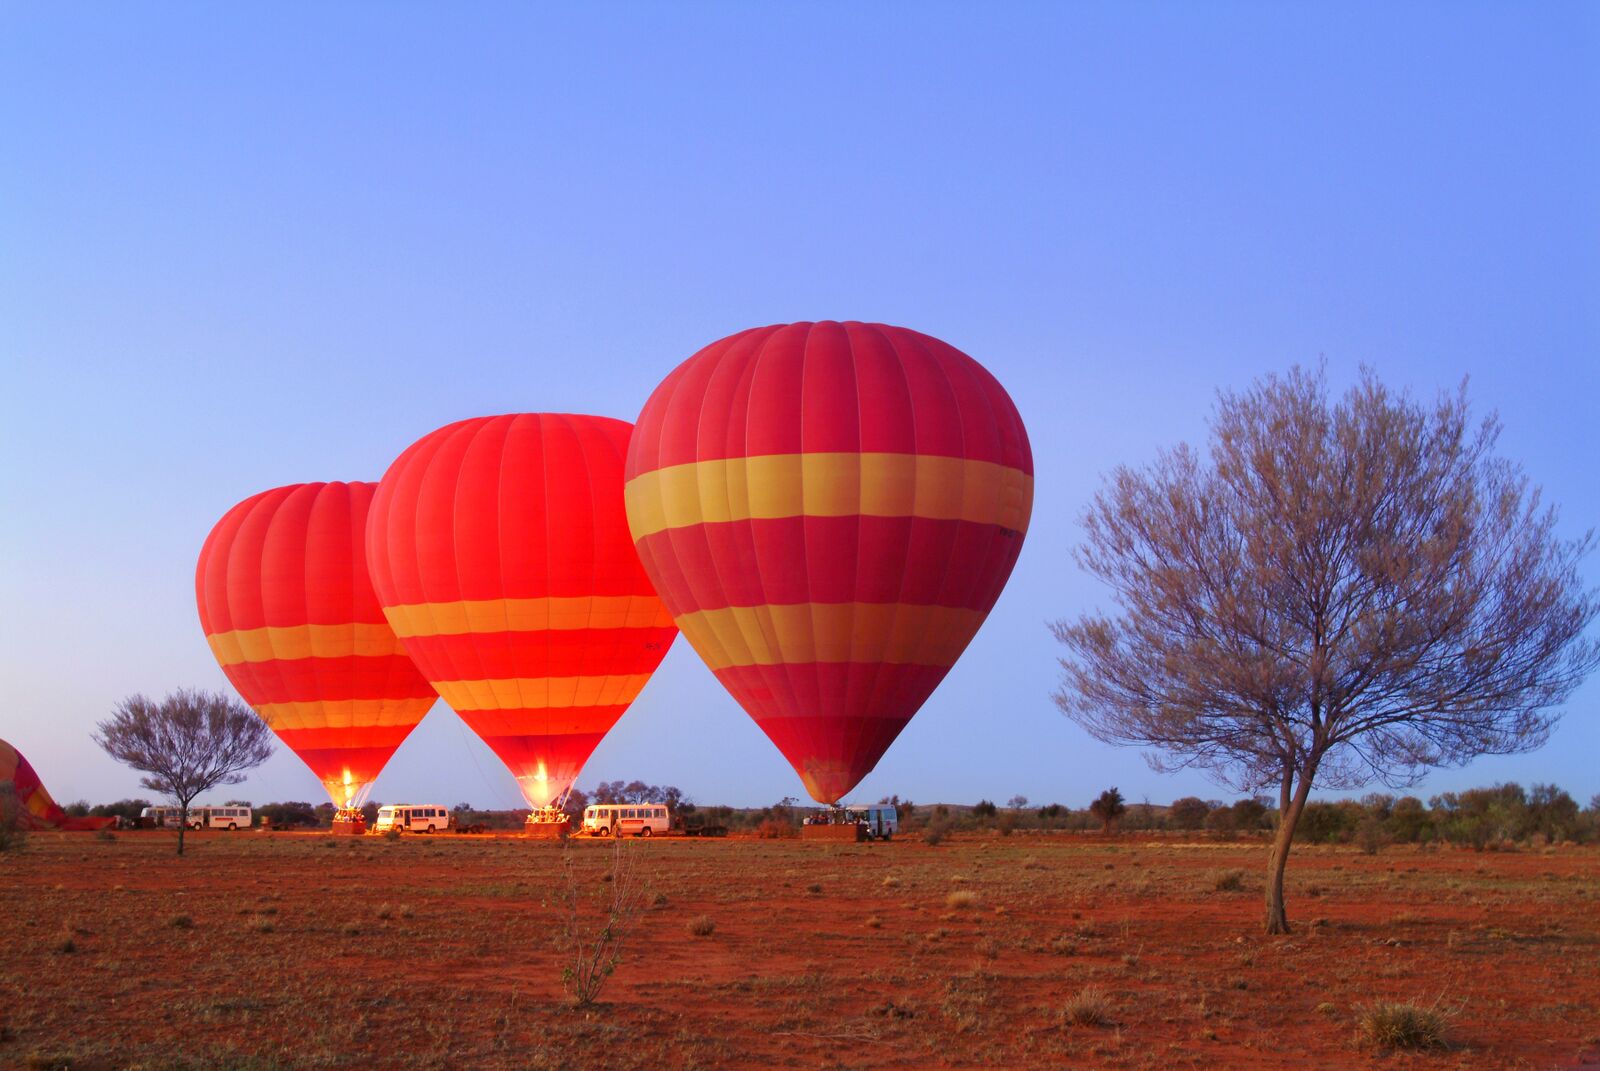 Outback Ballooning 3 balloons launching